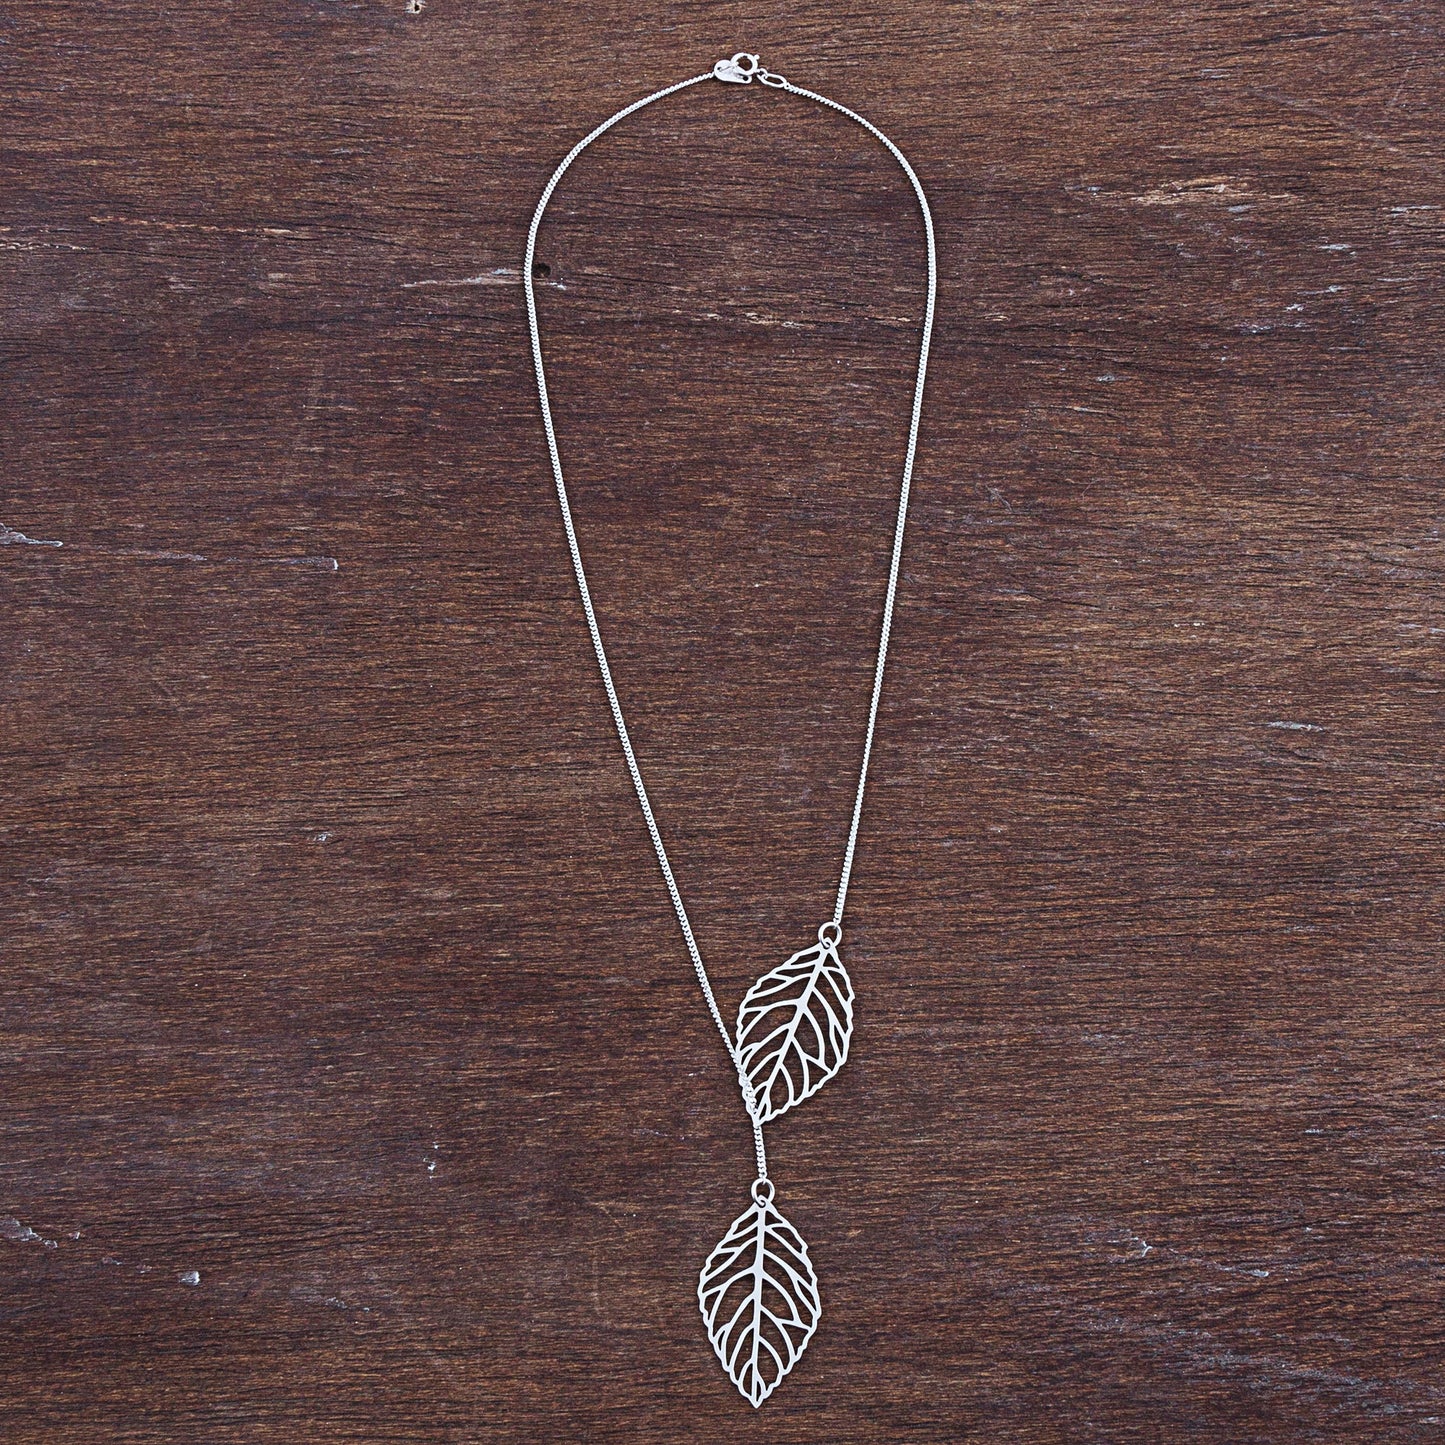 Shining Leaves Sterling Silver Pendant Necklace Leaves from Peru